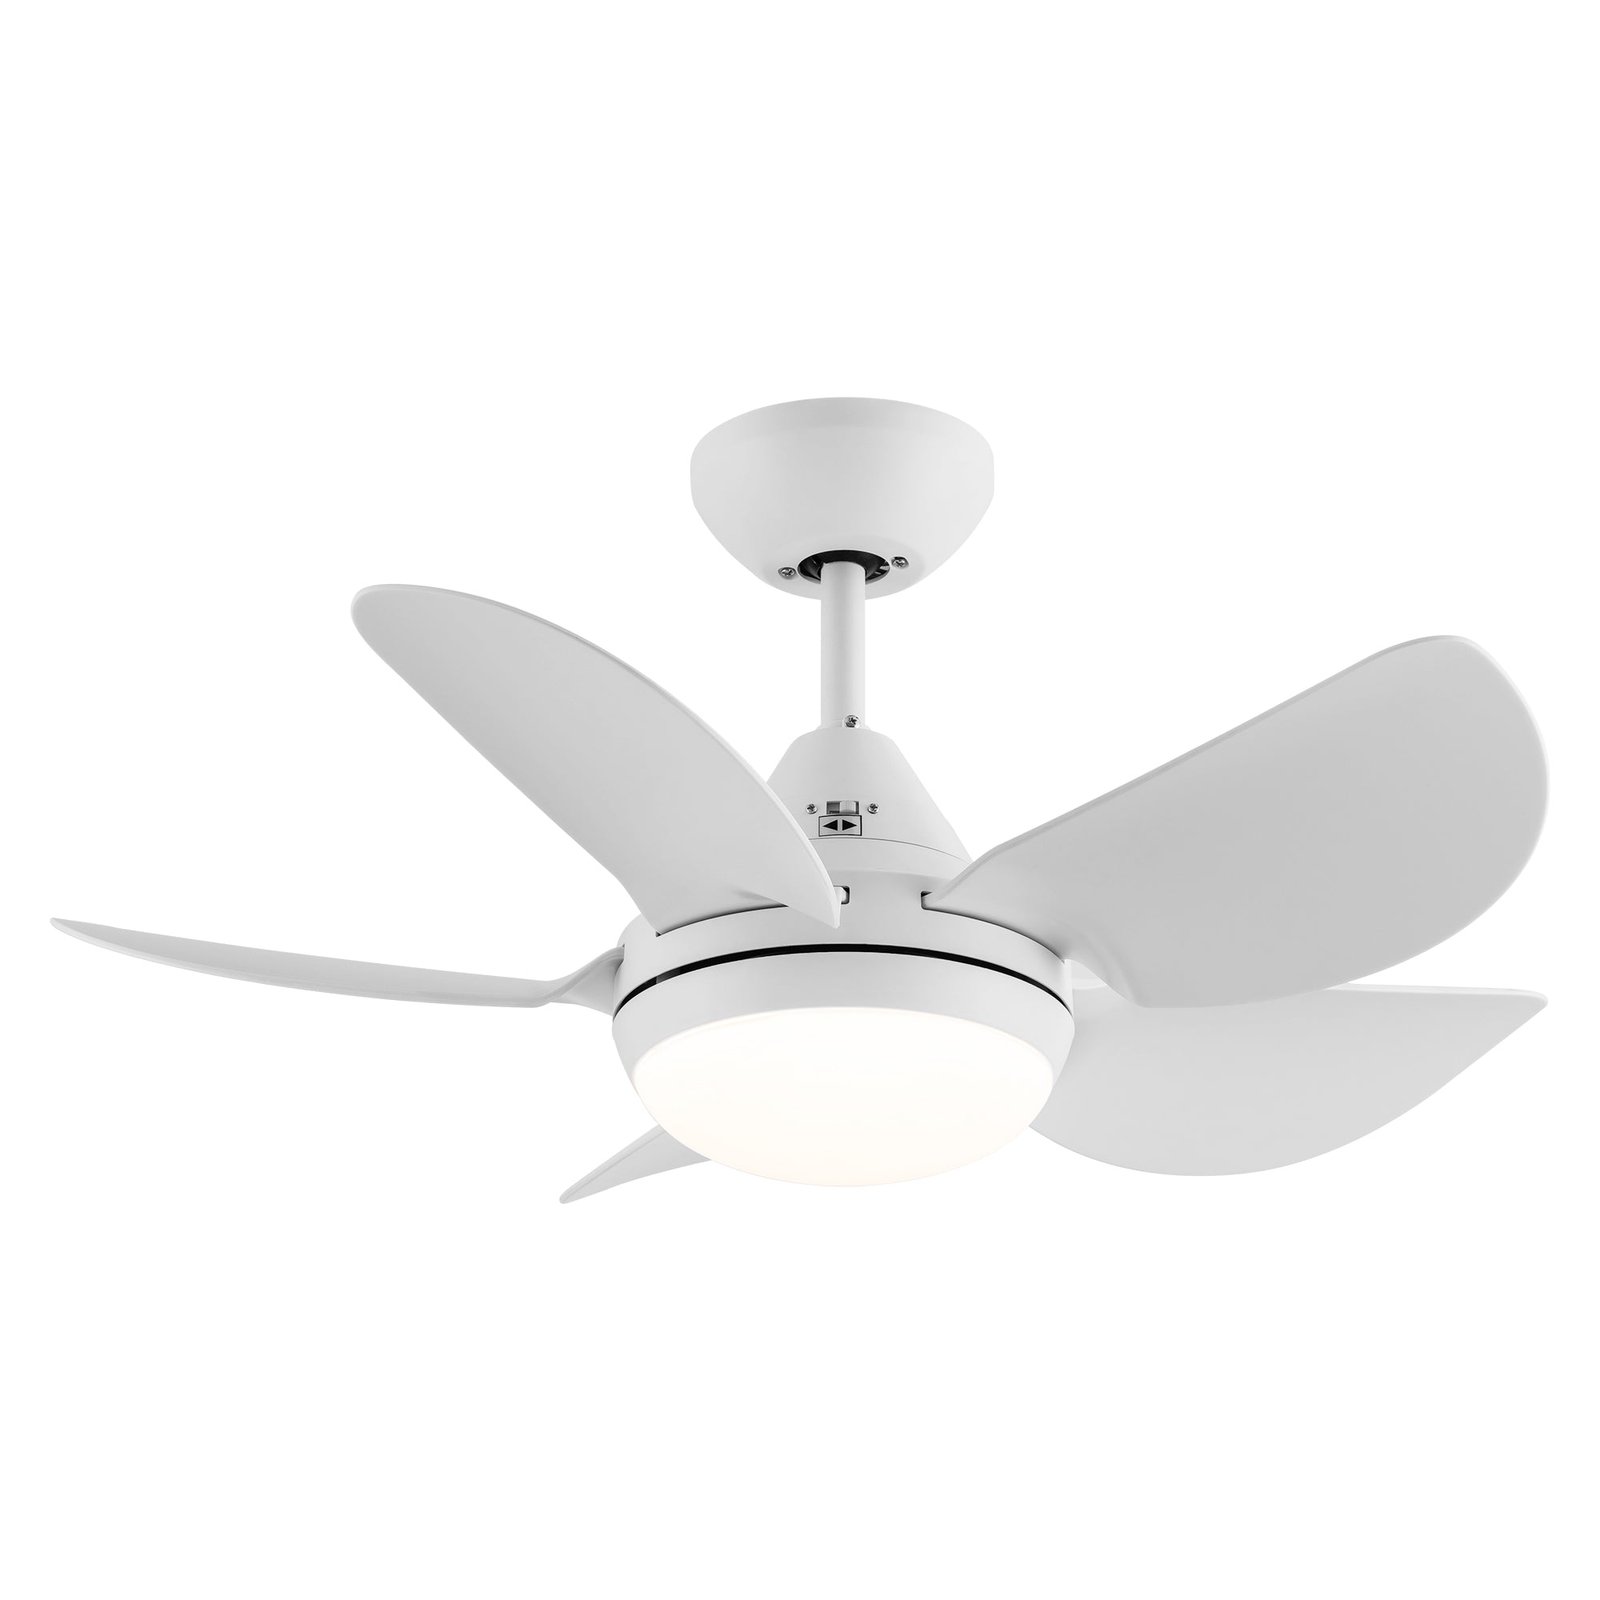 Ceiling Fan Light with Remote Control - Vox 38 Inches (30 Inch Diameter x 13.8 Inch Height) - White - 110V